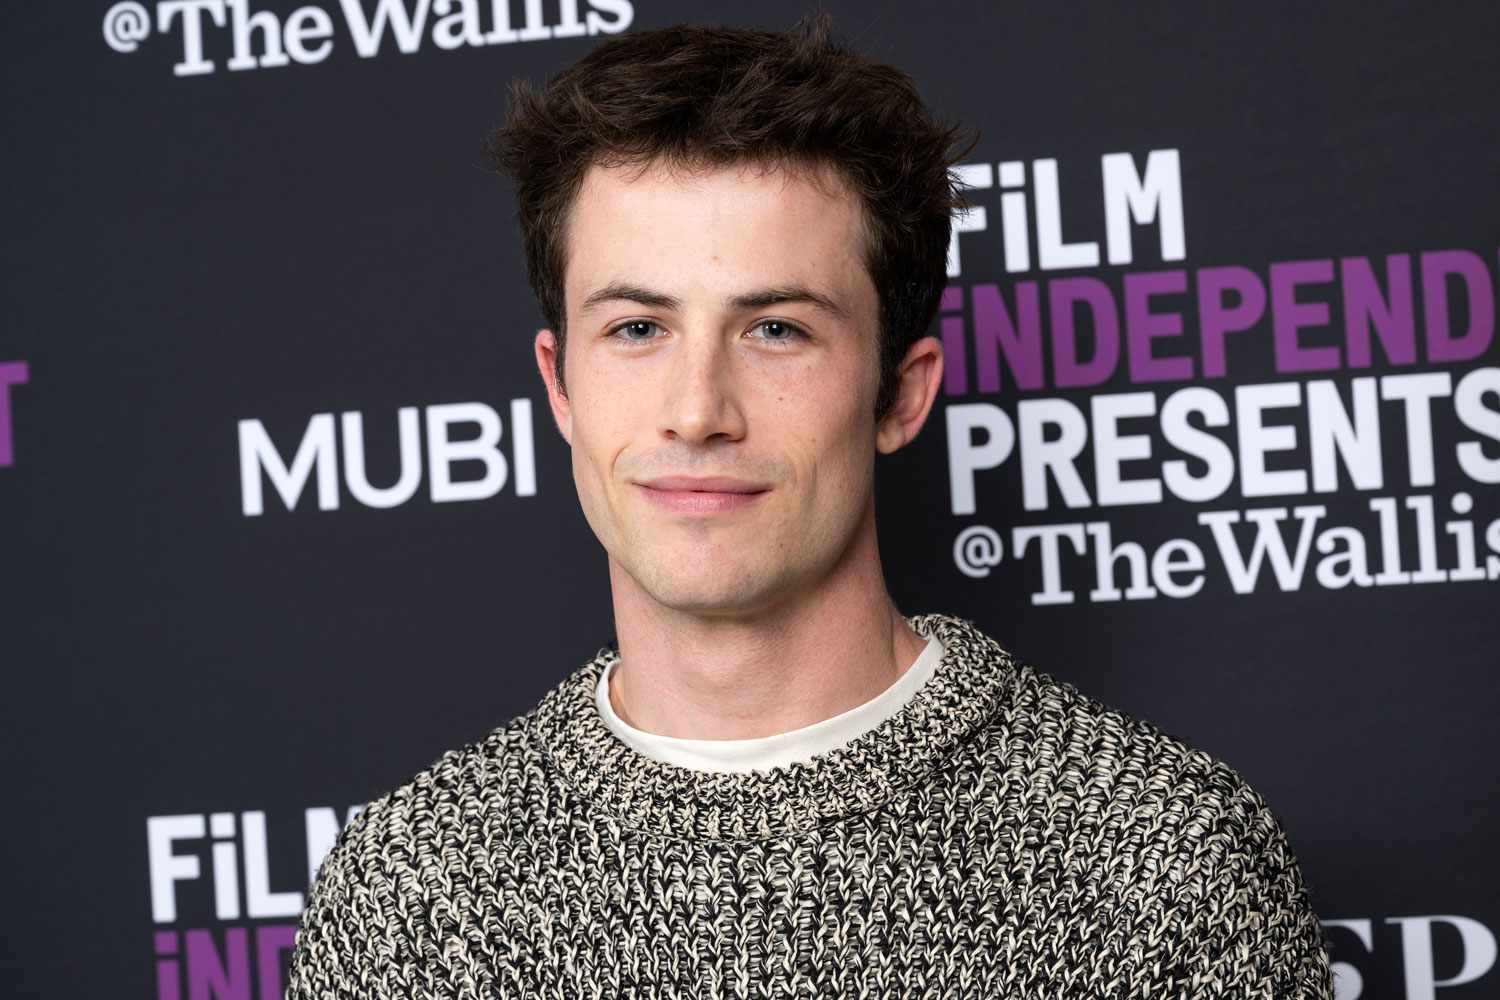 Why Dylan Minnette Quit Acting After “13 Reasons Why” and “Scream”